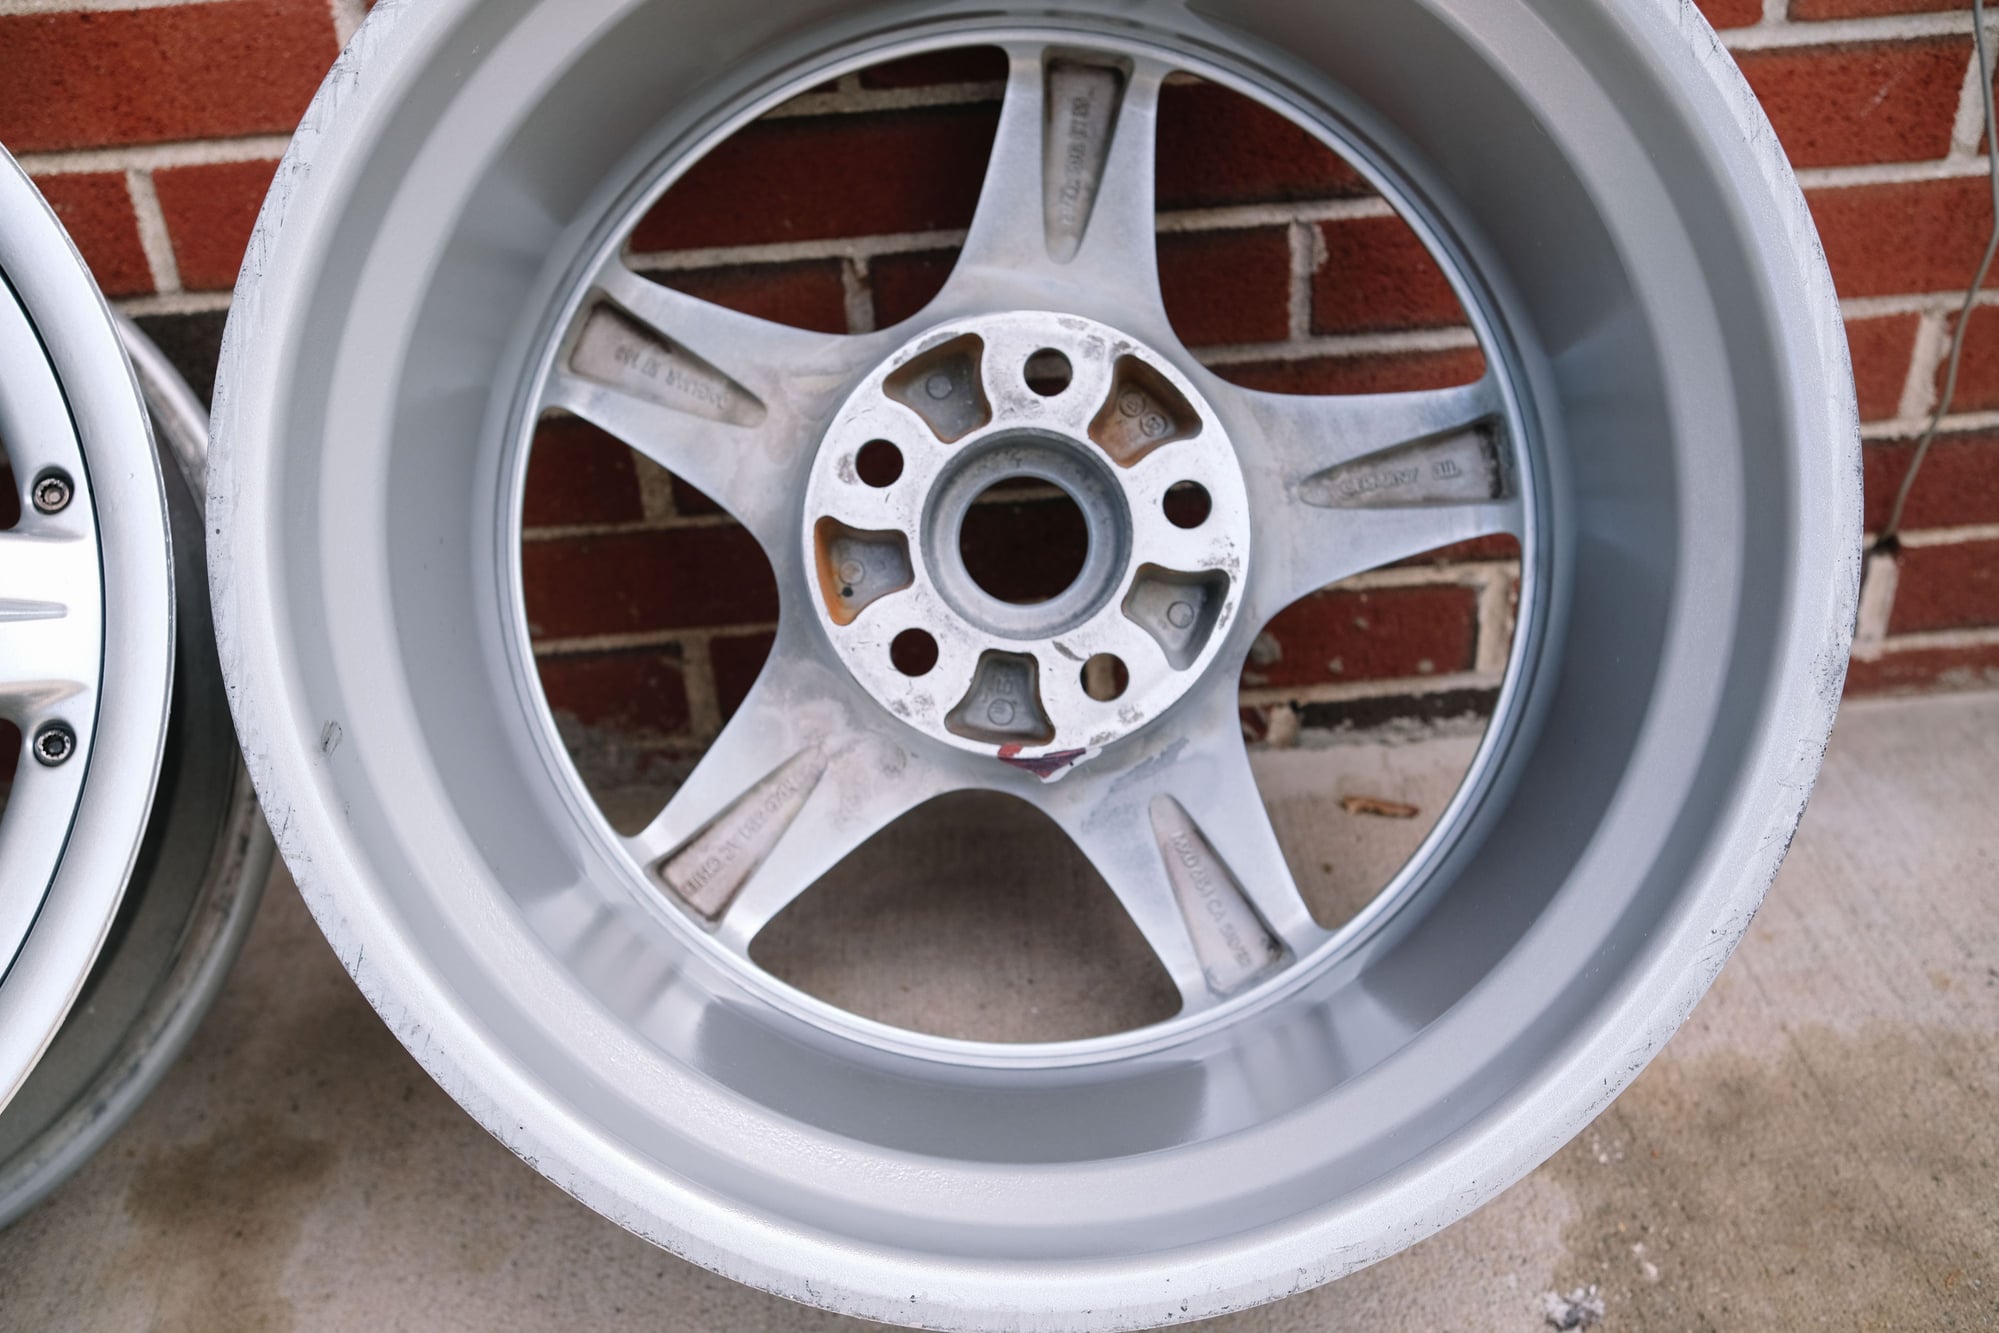 Wheels and Tires/Axles - BBS Oyster(Jaguar XJR) 18x8.5, Recently Powder Coated, Not Perfect - Used - 1989 to 2001 Jaguar XJ - East Berlin, CT 06023, United States